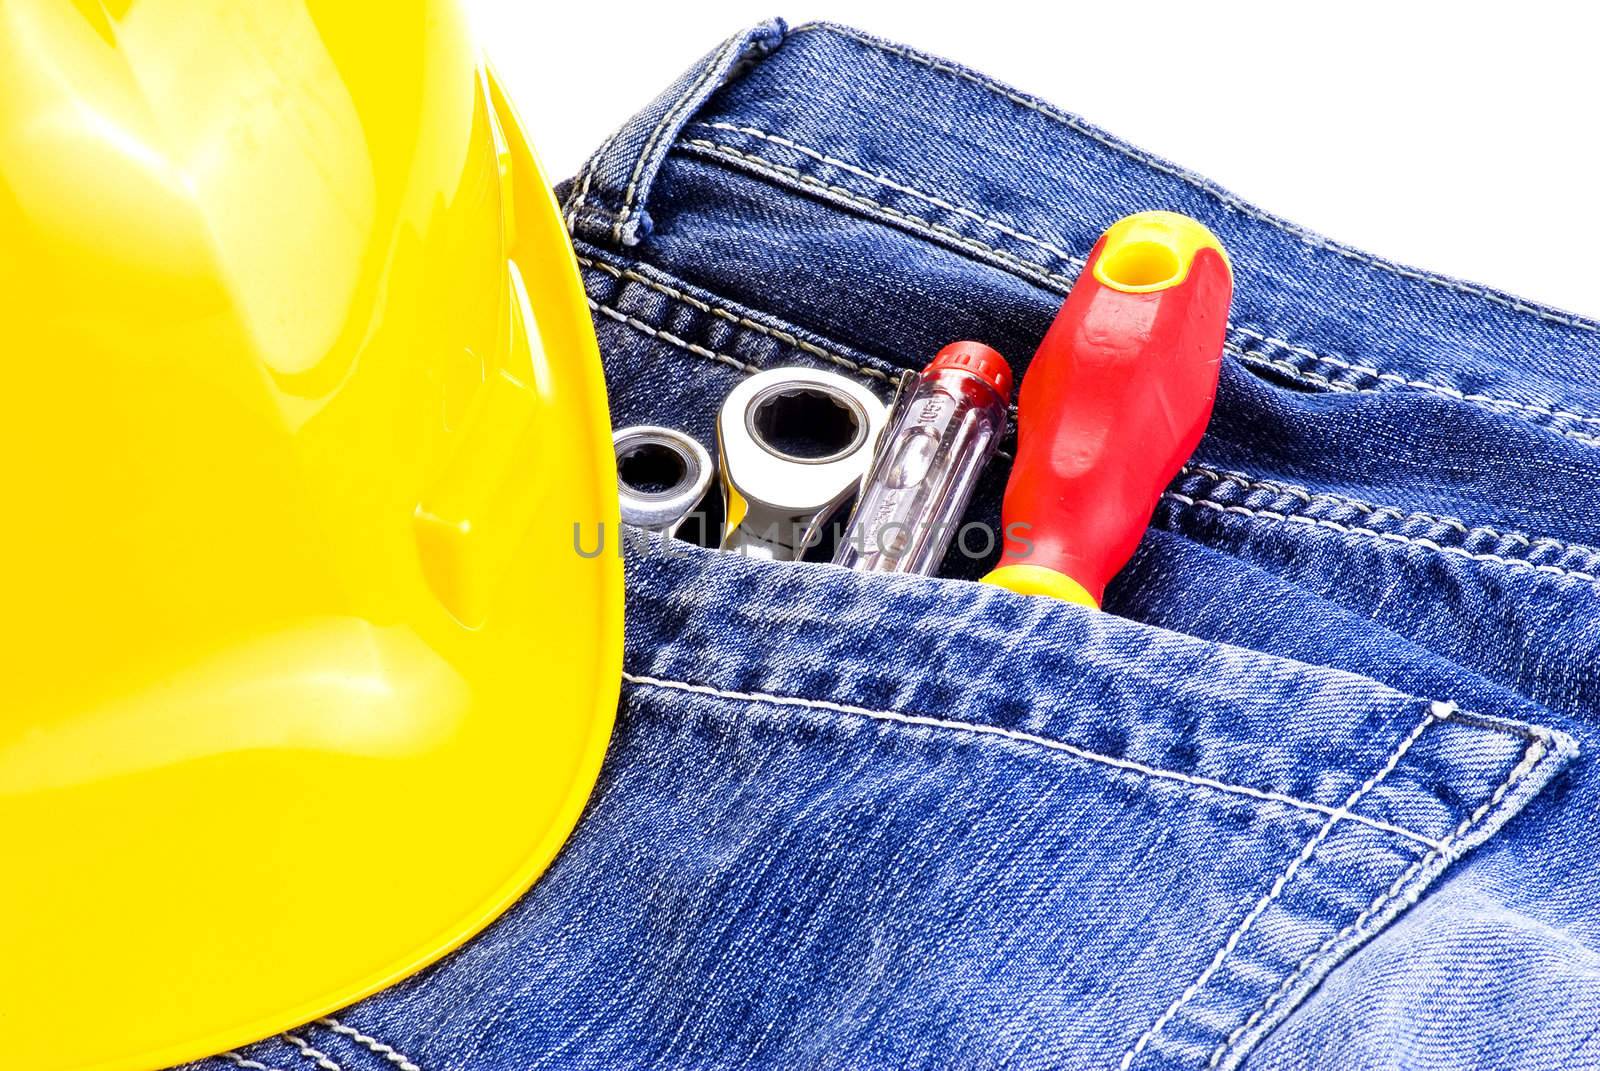 Toolkit in a blue jeans pocket with yellow hat